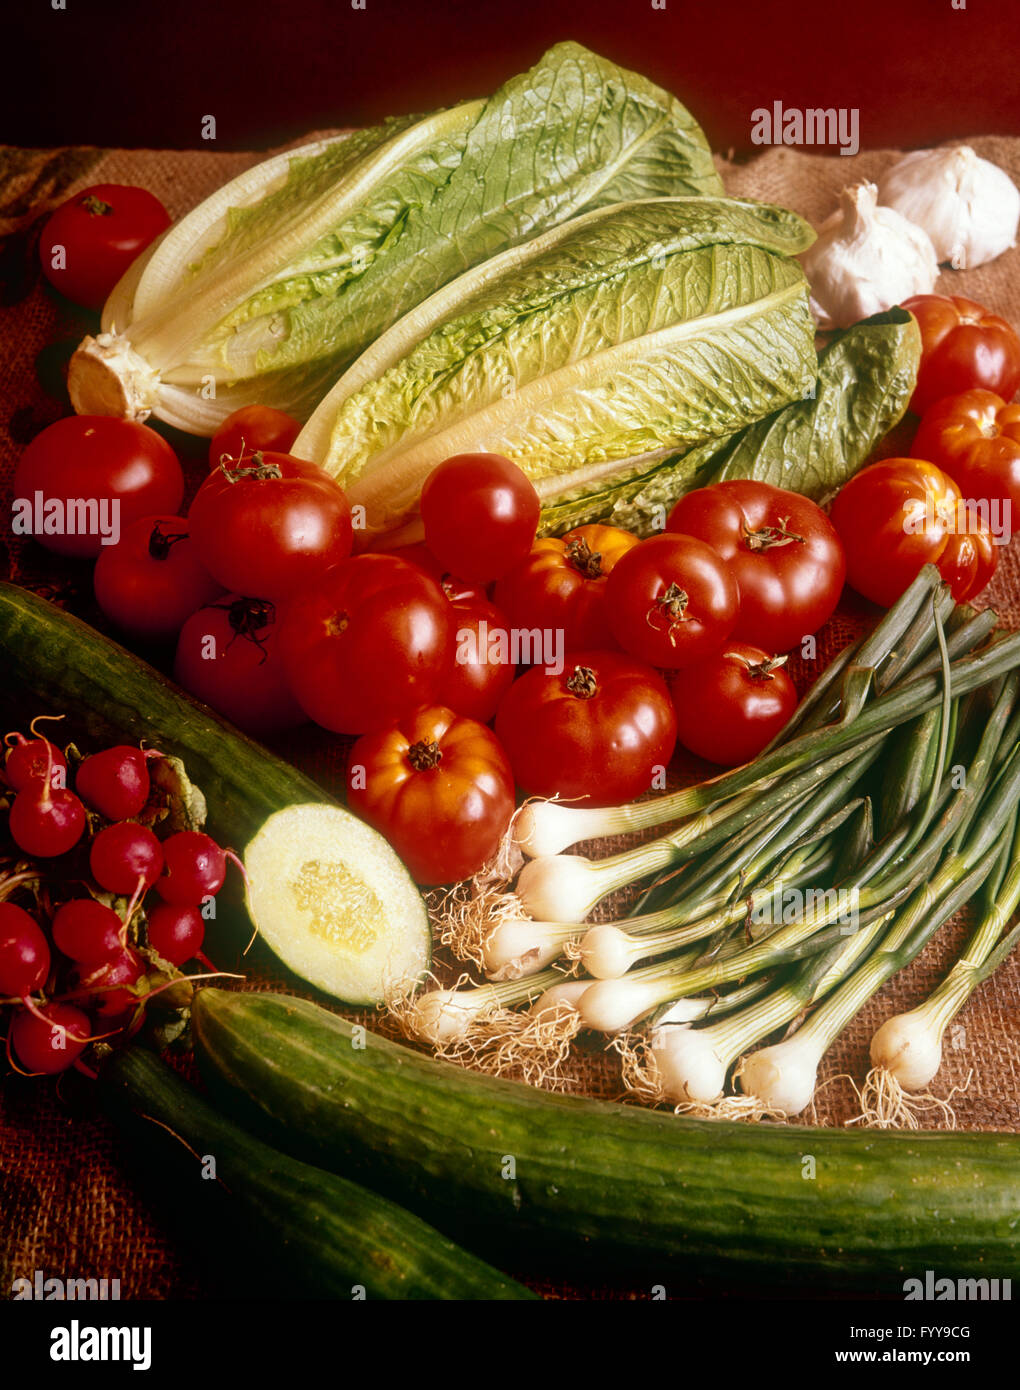 Colorful vegetables together, indoors. Stock Photo